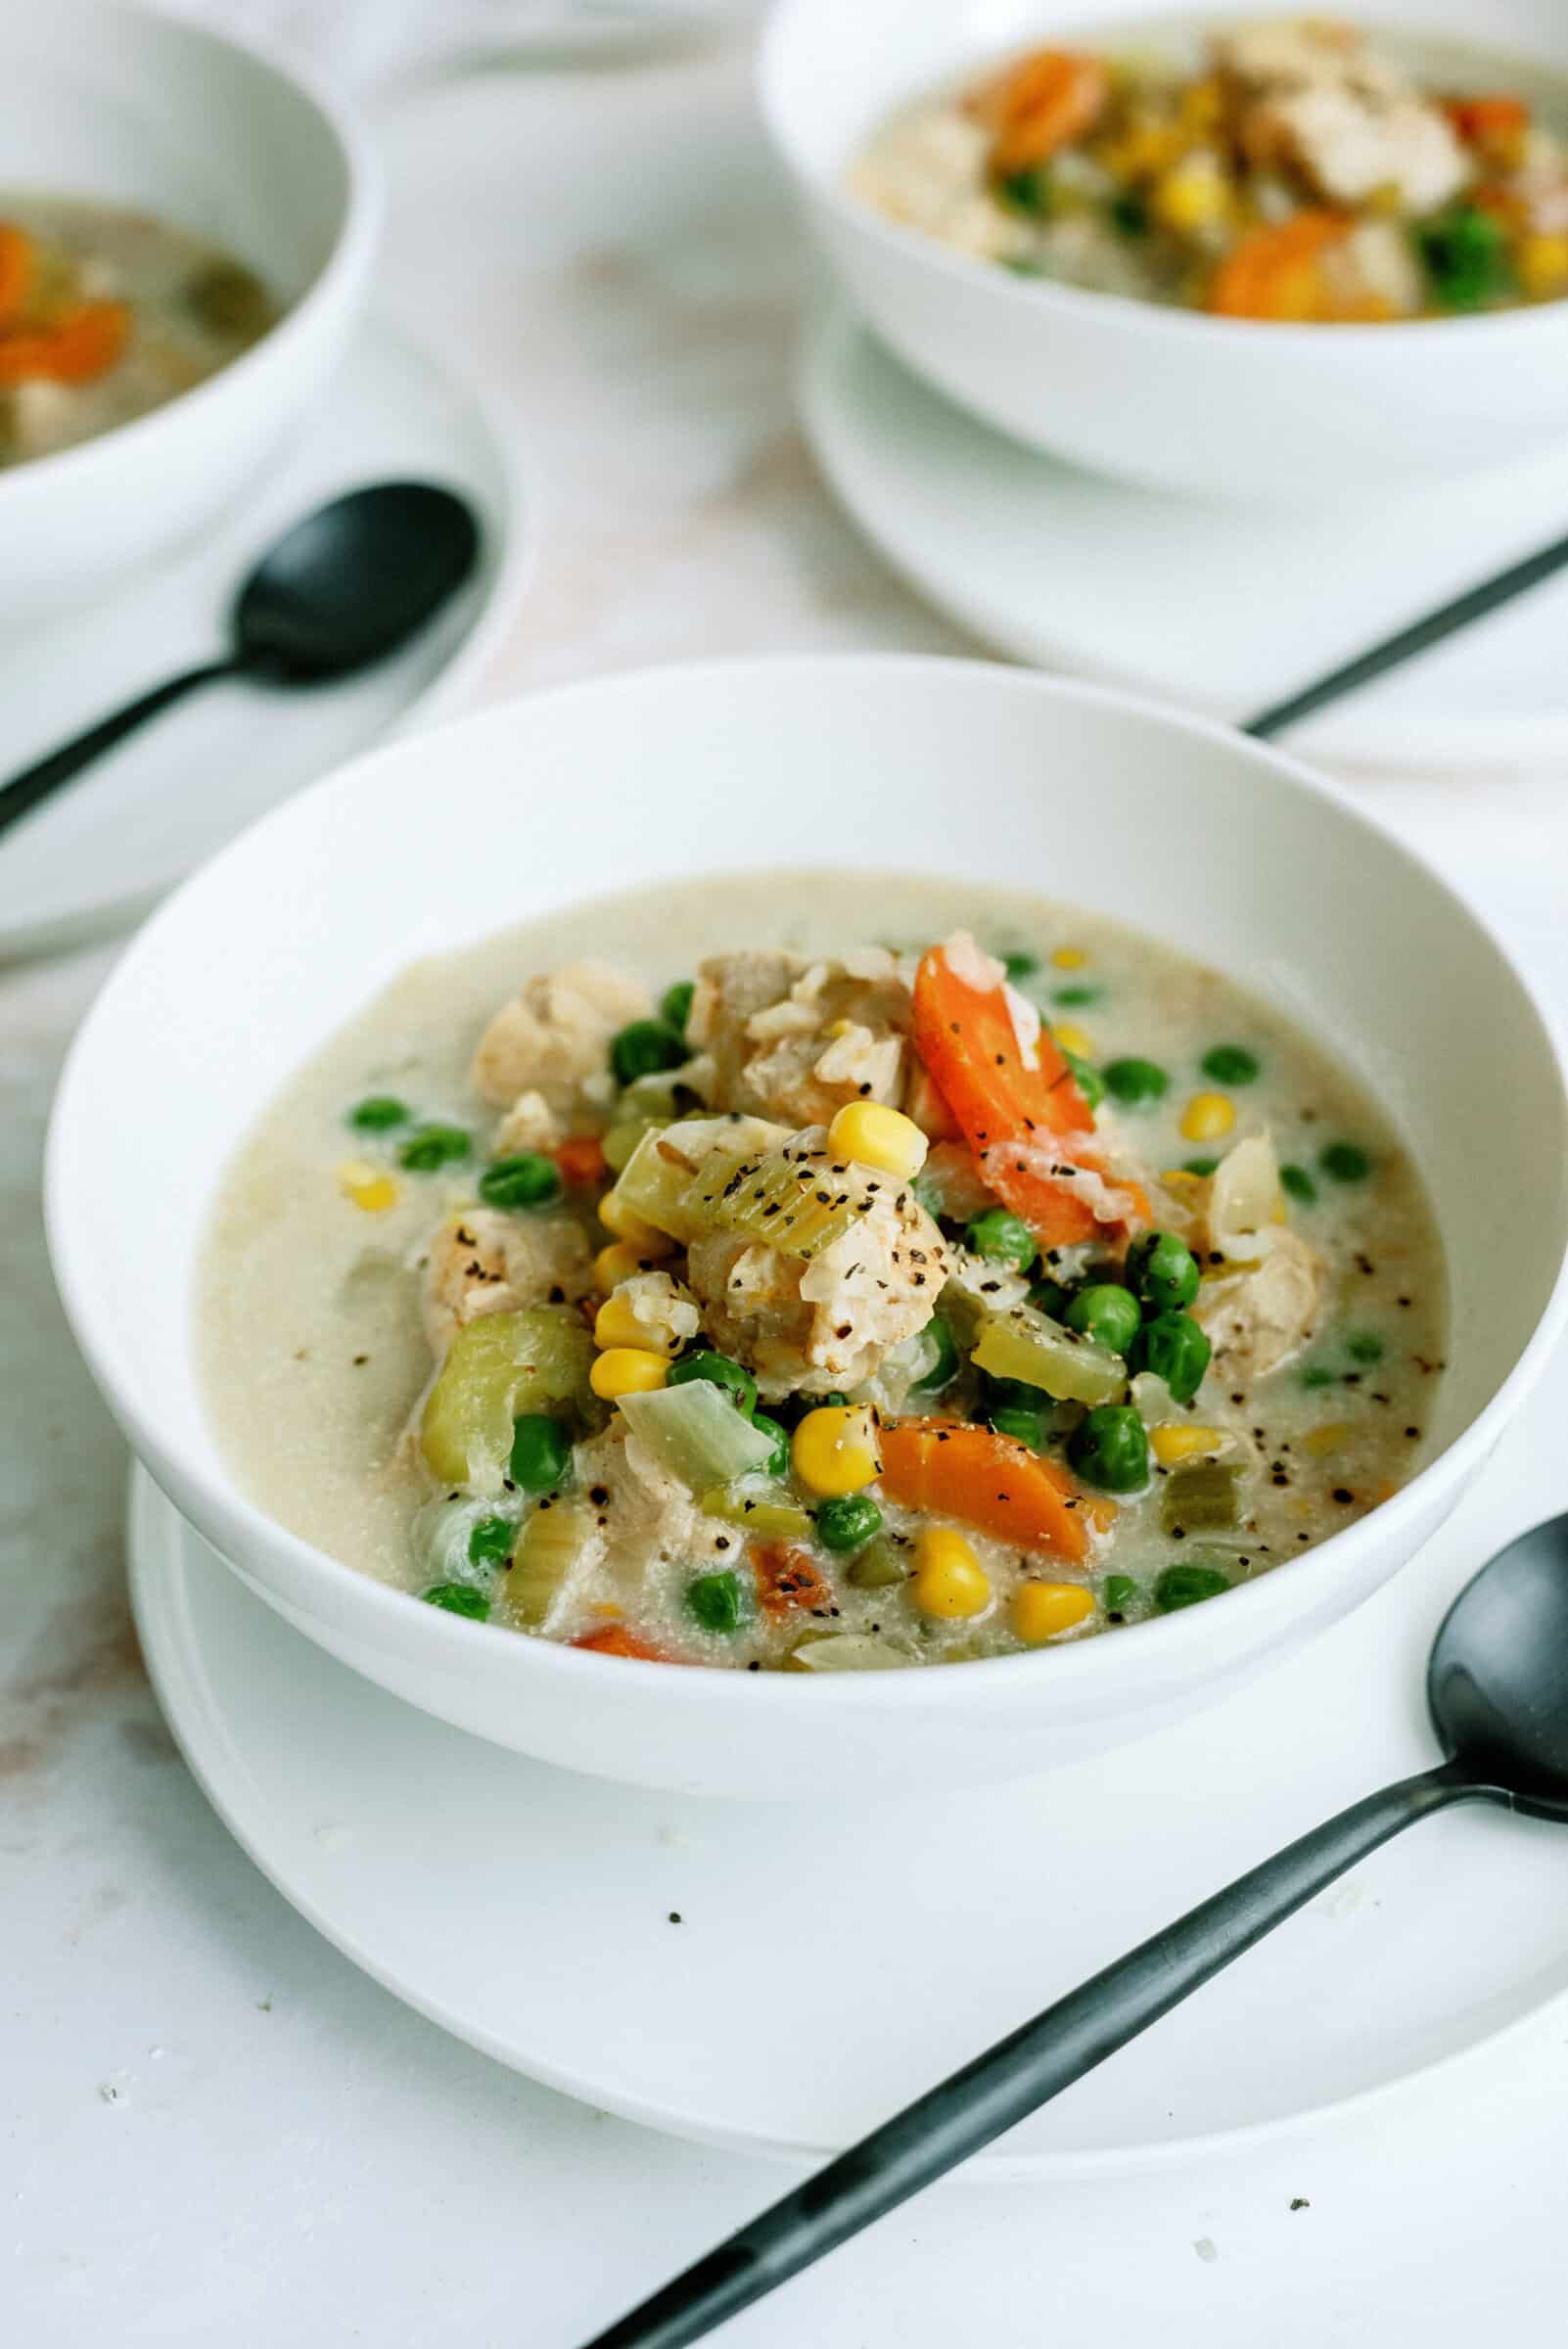 https://www.sixsistersstuff.com/wp-content/uploads/2020/10/instant-pot-creamy-chicken-rice-soup-6934-scaled.jpg